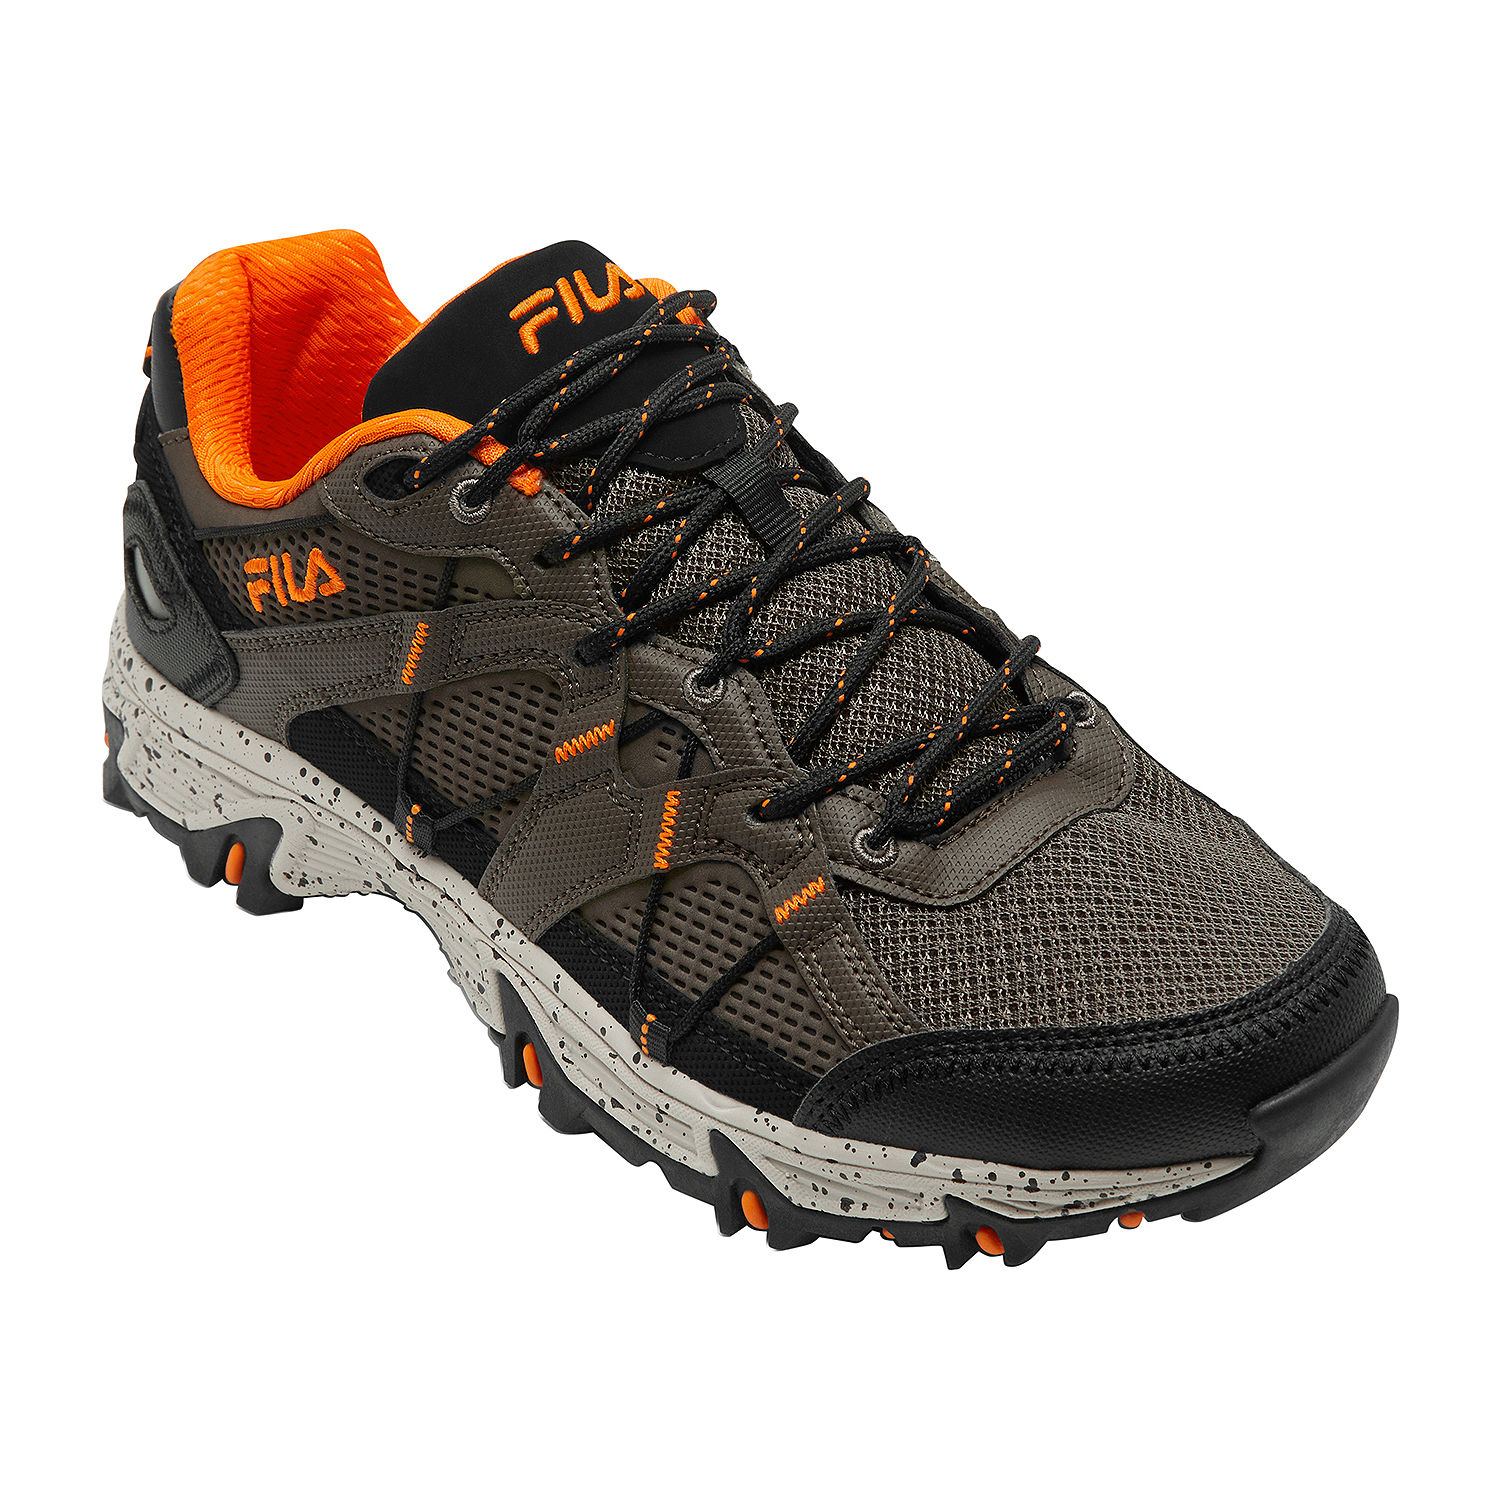 Fila Grand Tier Trail Walking Shoes $27.99 @JCPenny (Free Ship to store)